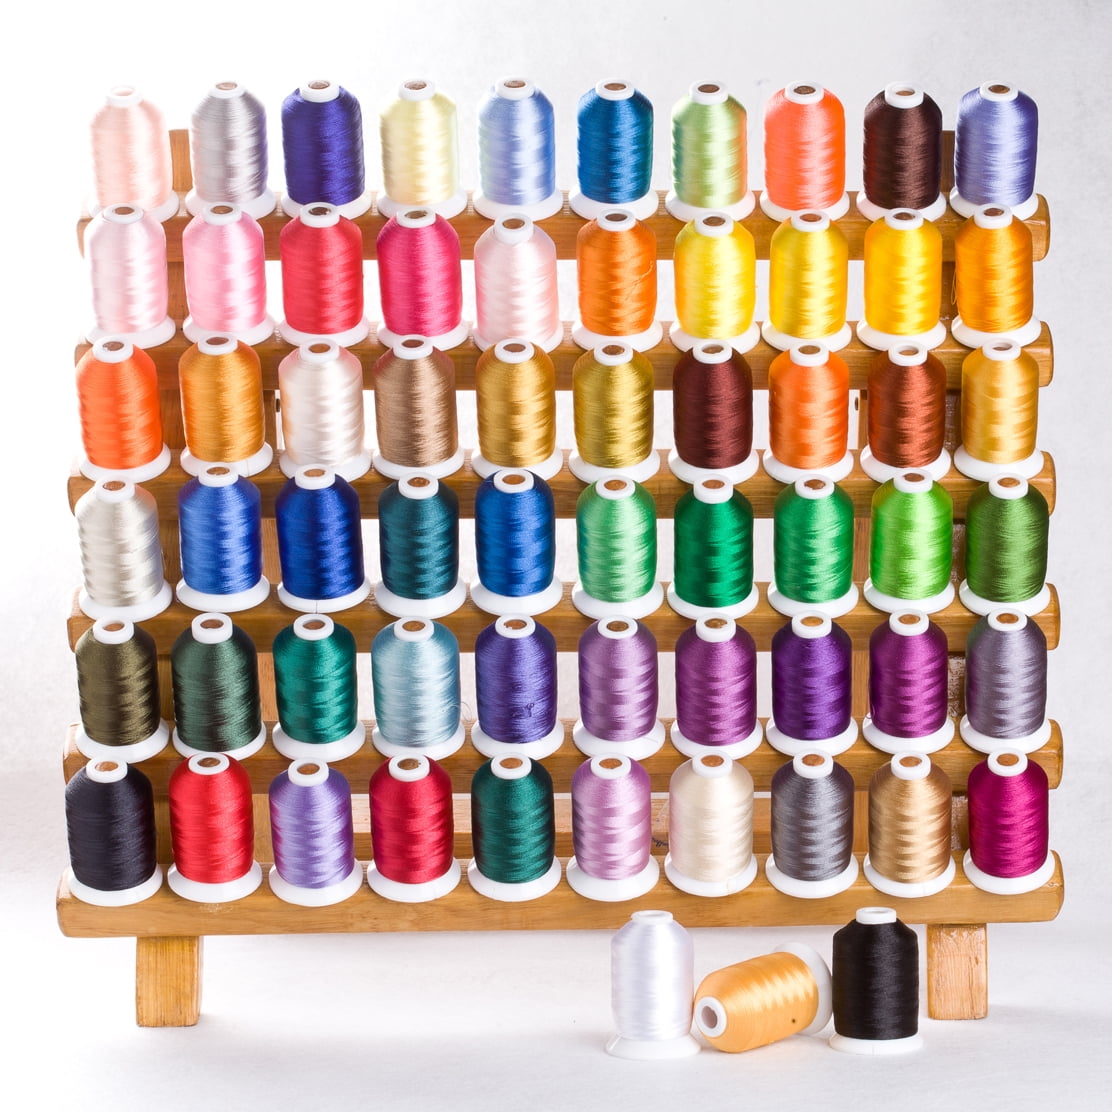 Simthread 63 Brother Colors Polyester Embroidery Machine Thread Kit 40 Weight...